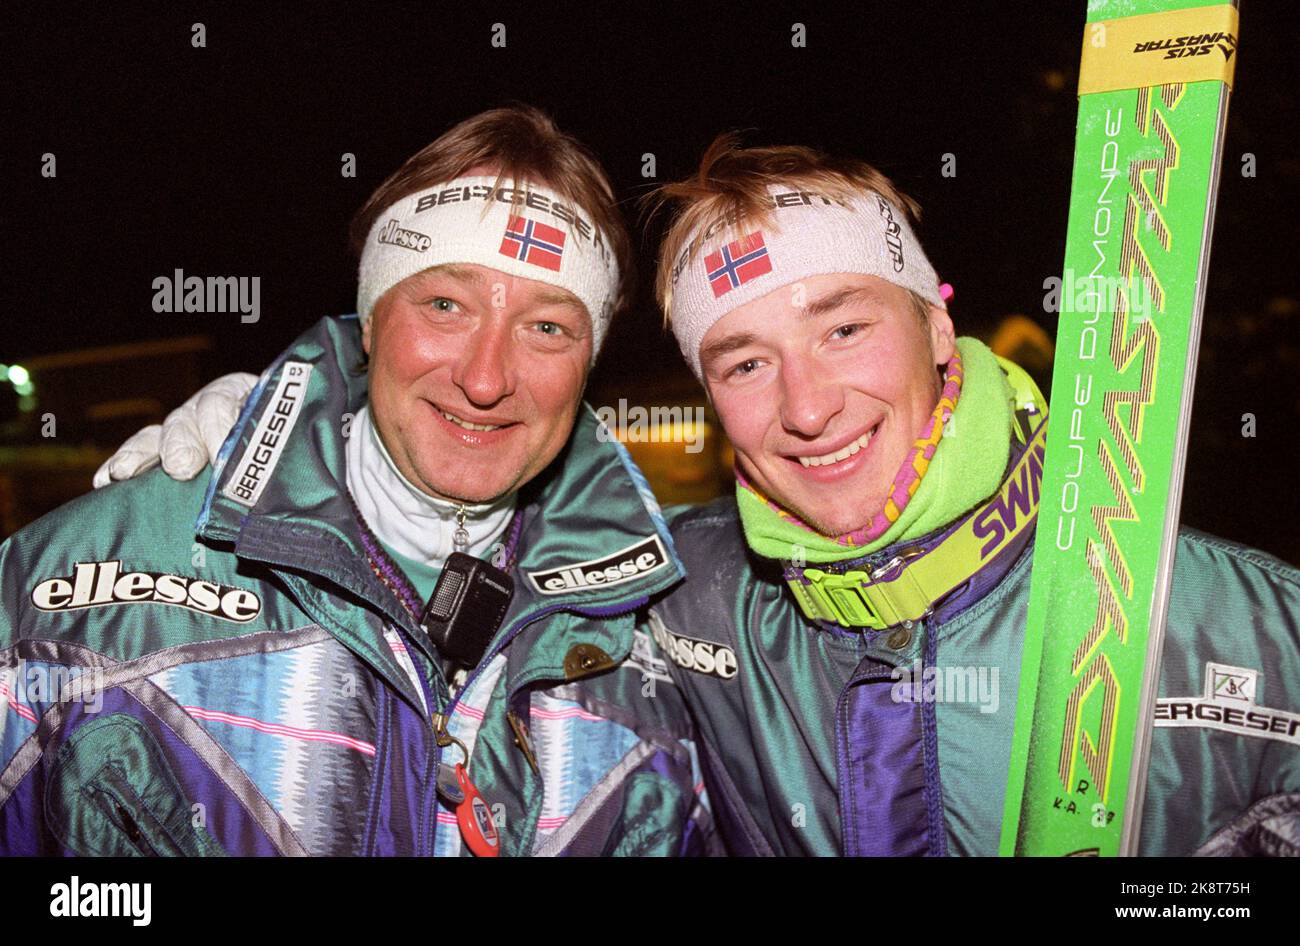 19921121. Alpinist Kjetil André Aamodt with his father Finn. Photo: Tor ...